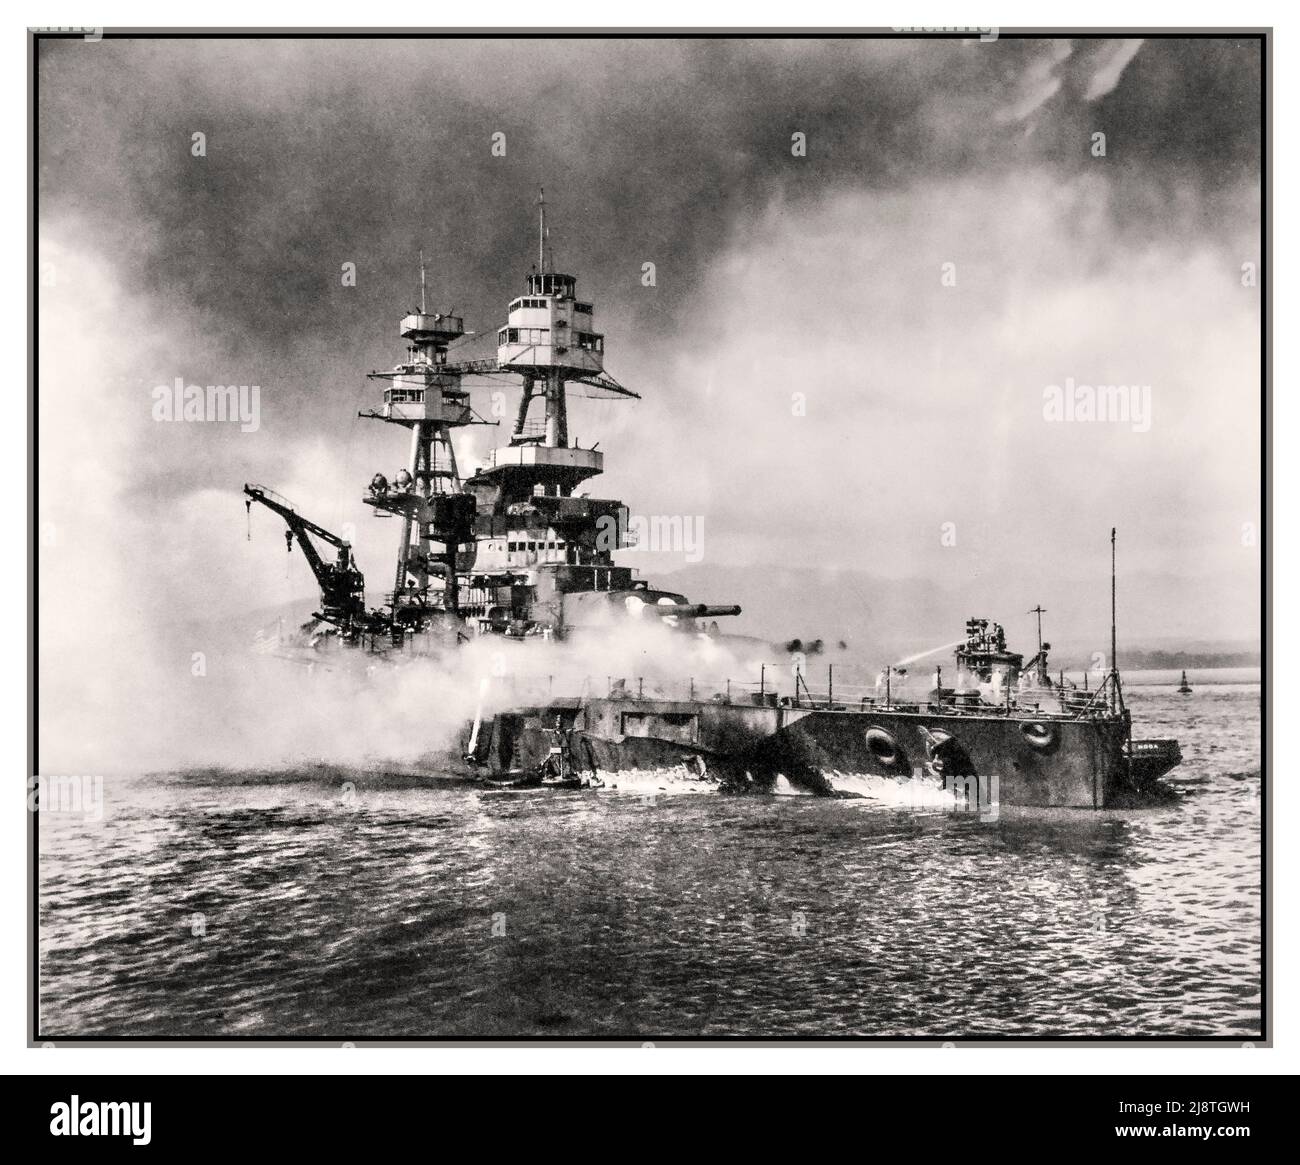 Pearl Harbor Attack USS NEVADA ,WW2 starts for USA December 7, 1941. USS Nevada (BB 36) burning during the Japanese aerial attack. Official U.S. Navy Photograph,  WW2 Hawaii USA America Stock Photo